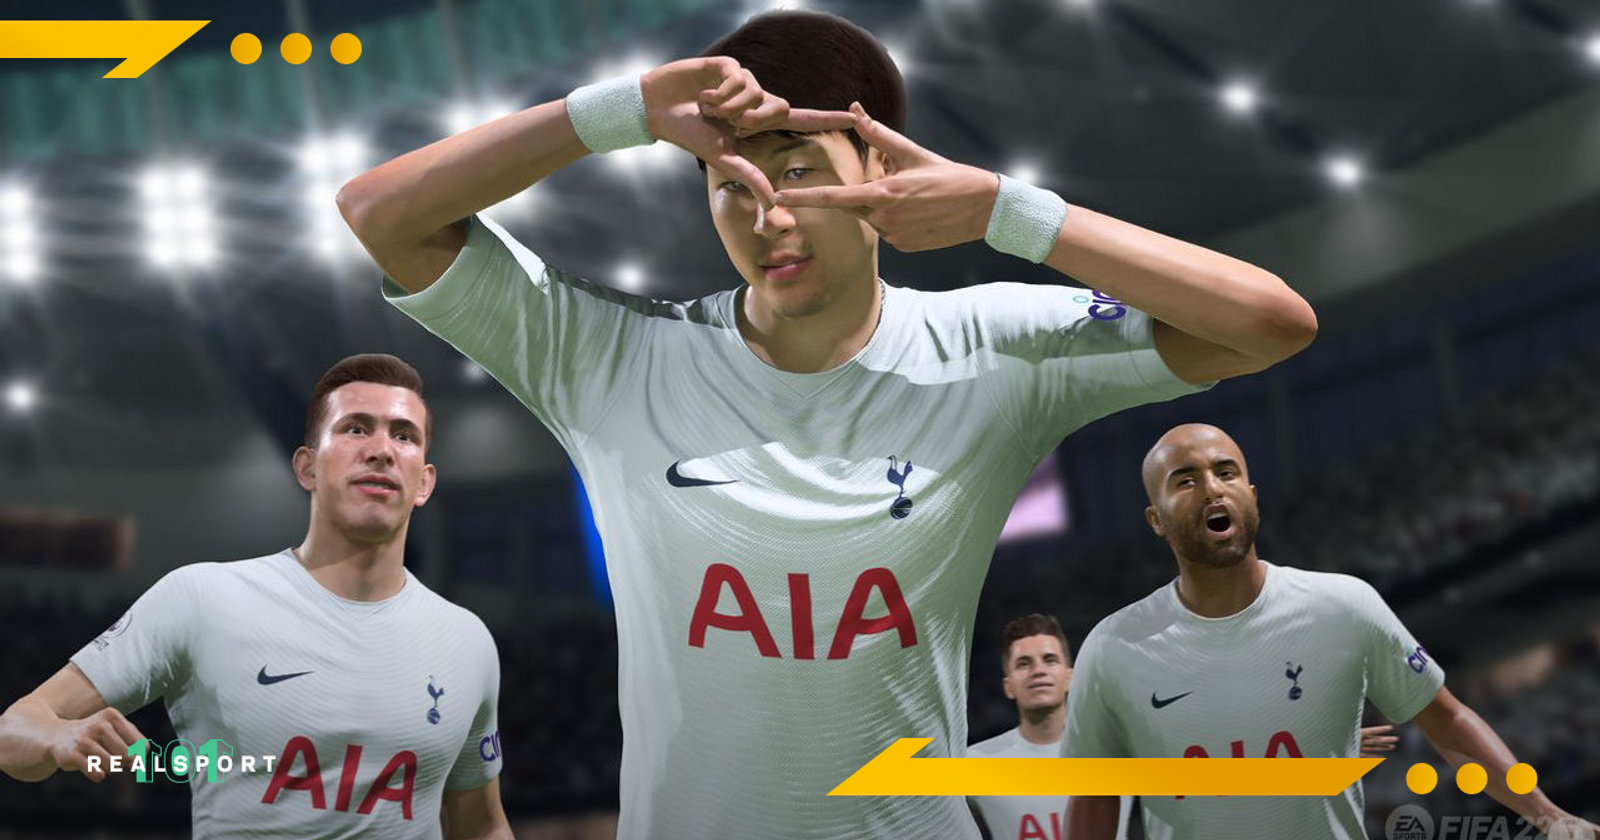 FIFA 22 Basic Controls For PC - An Official EA Site